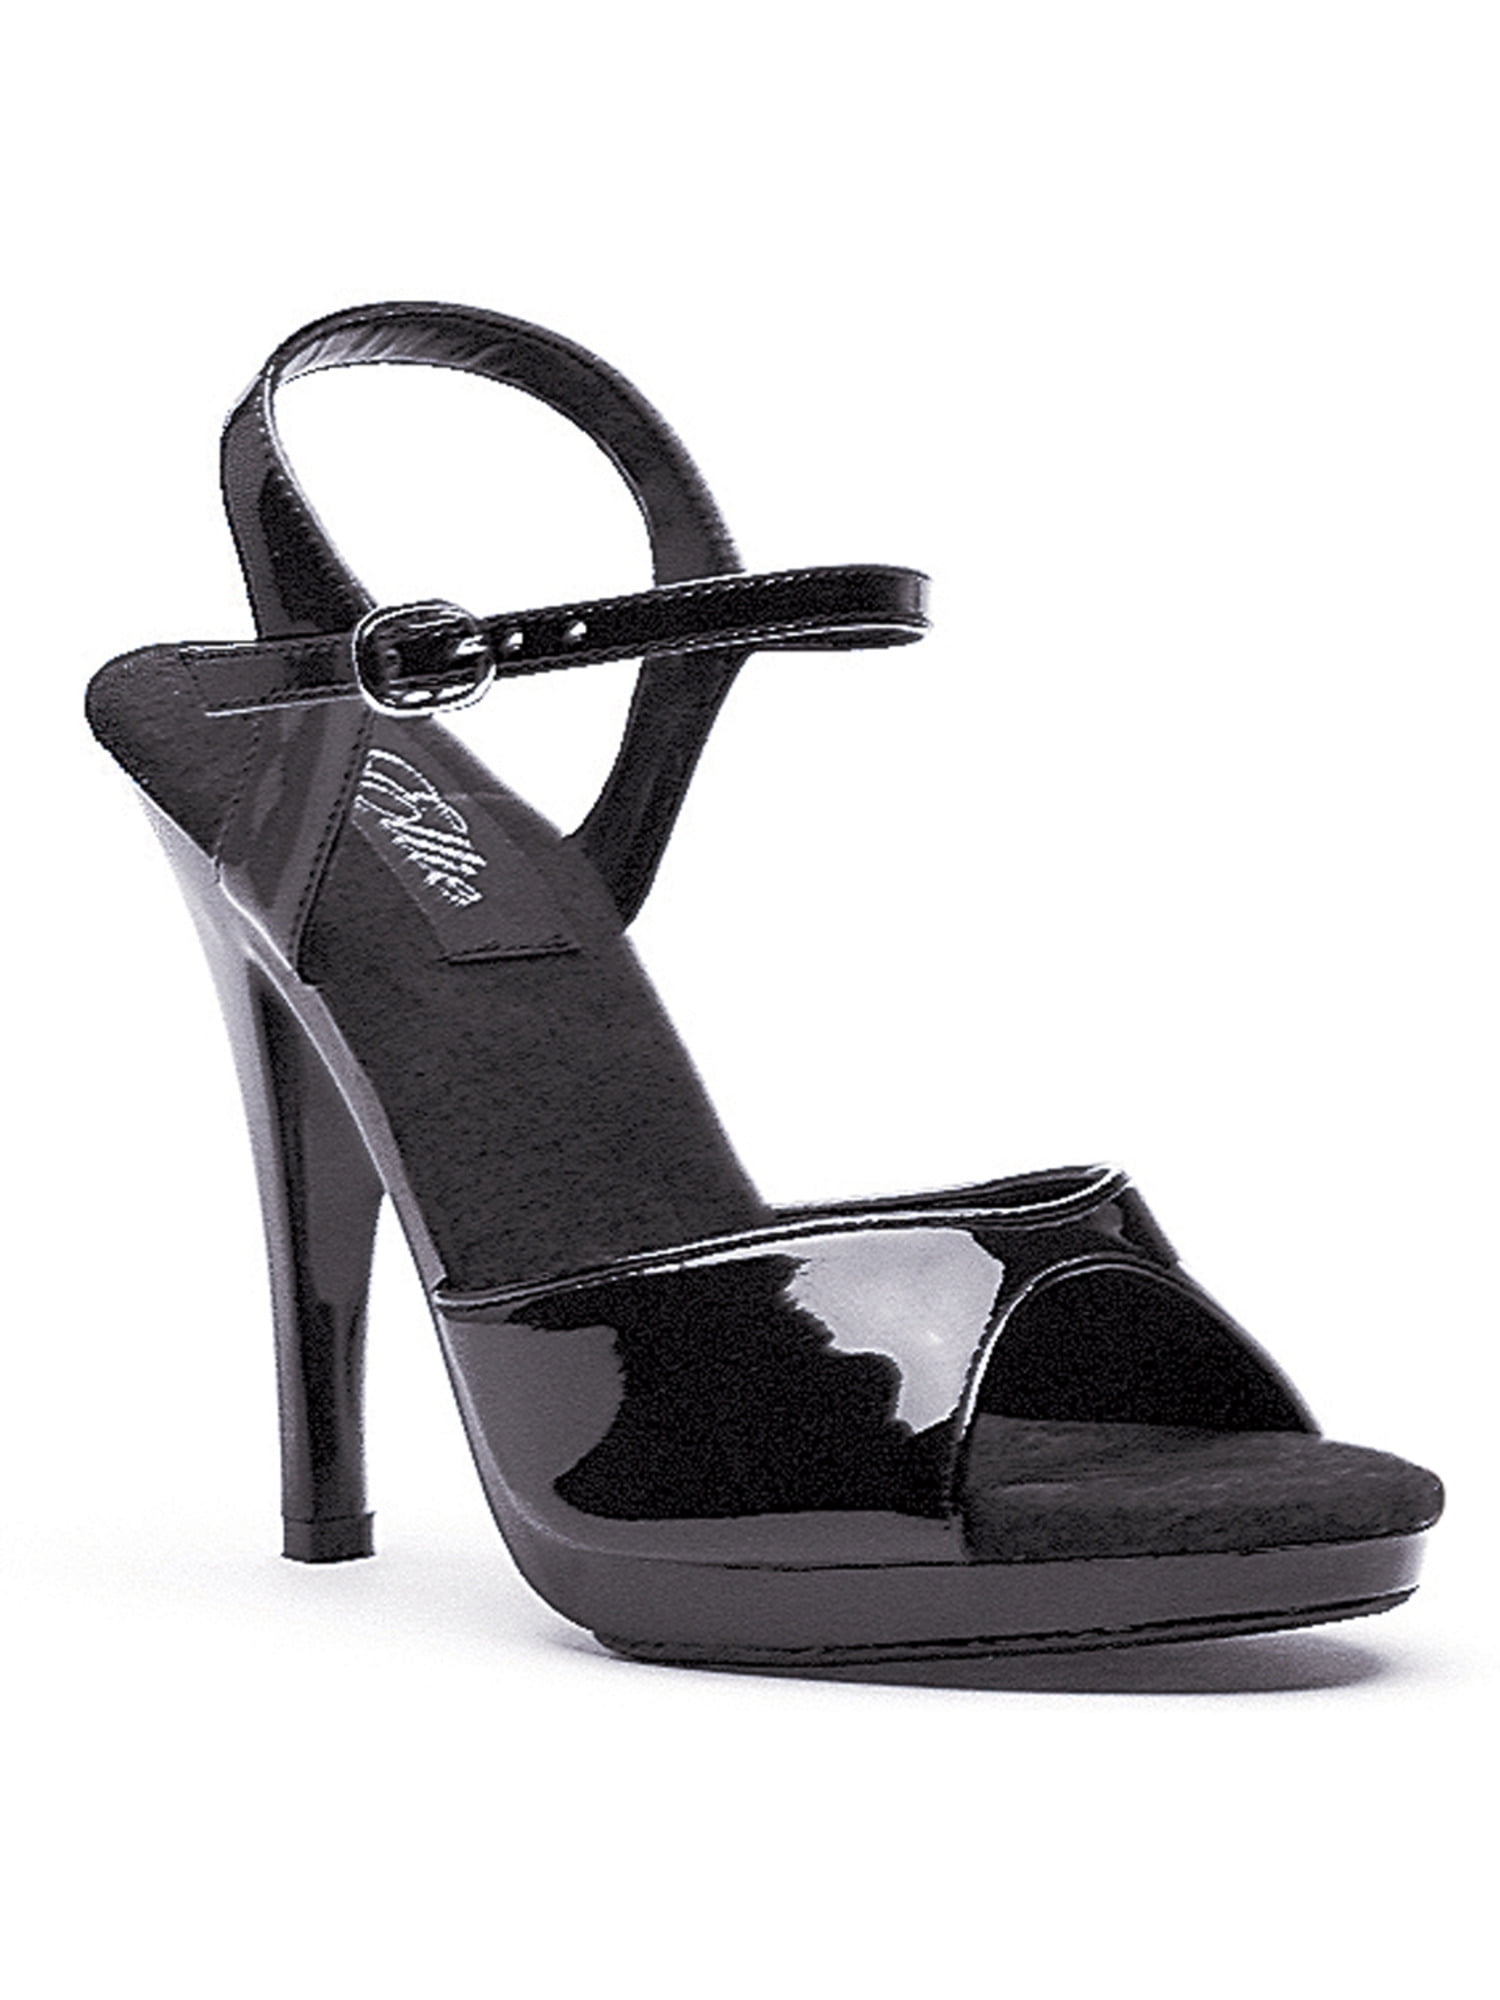 SummitFashions - Womens Black Ankle Strap Sandals 4 1/2 Inch Heels ...